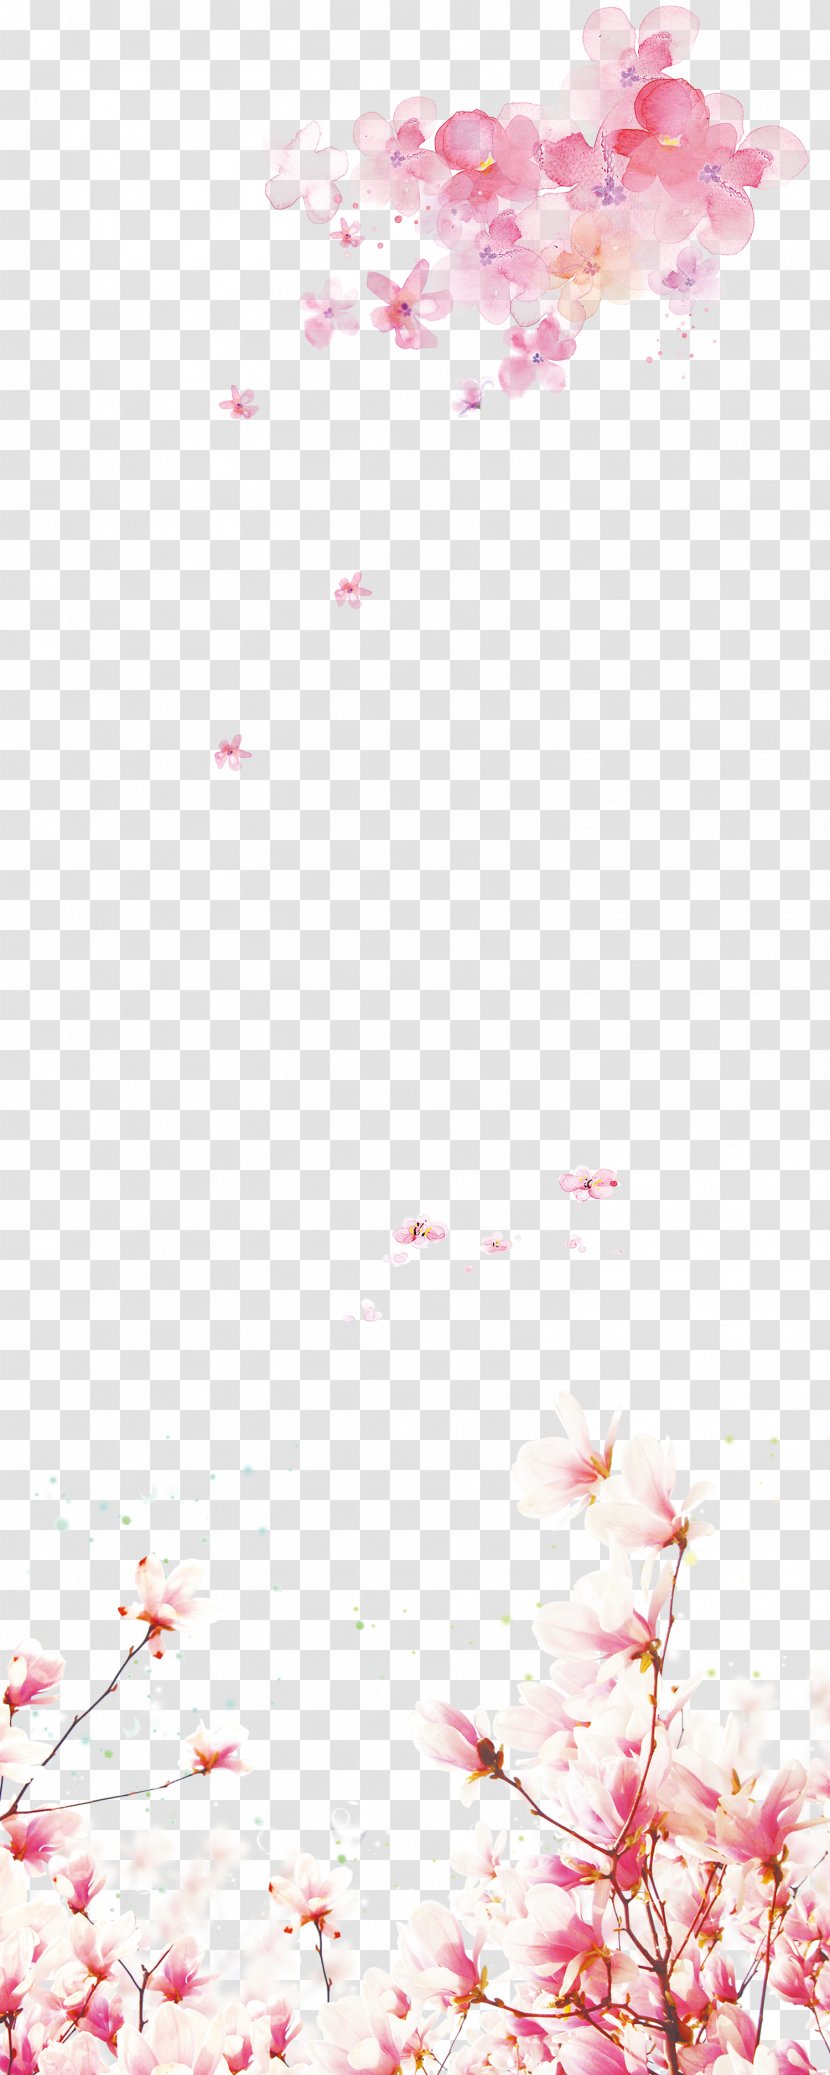 Flower Download - Heart - Cherry Blossoms Transparent PNG